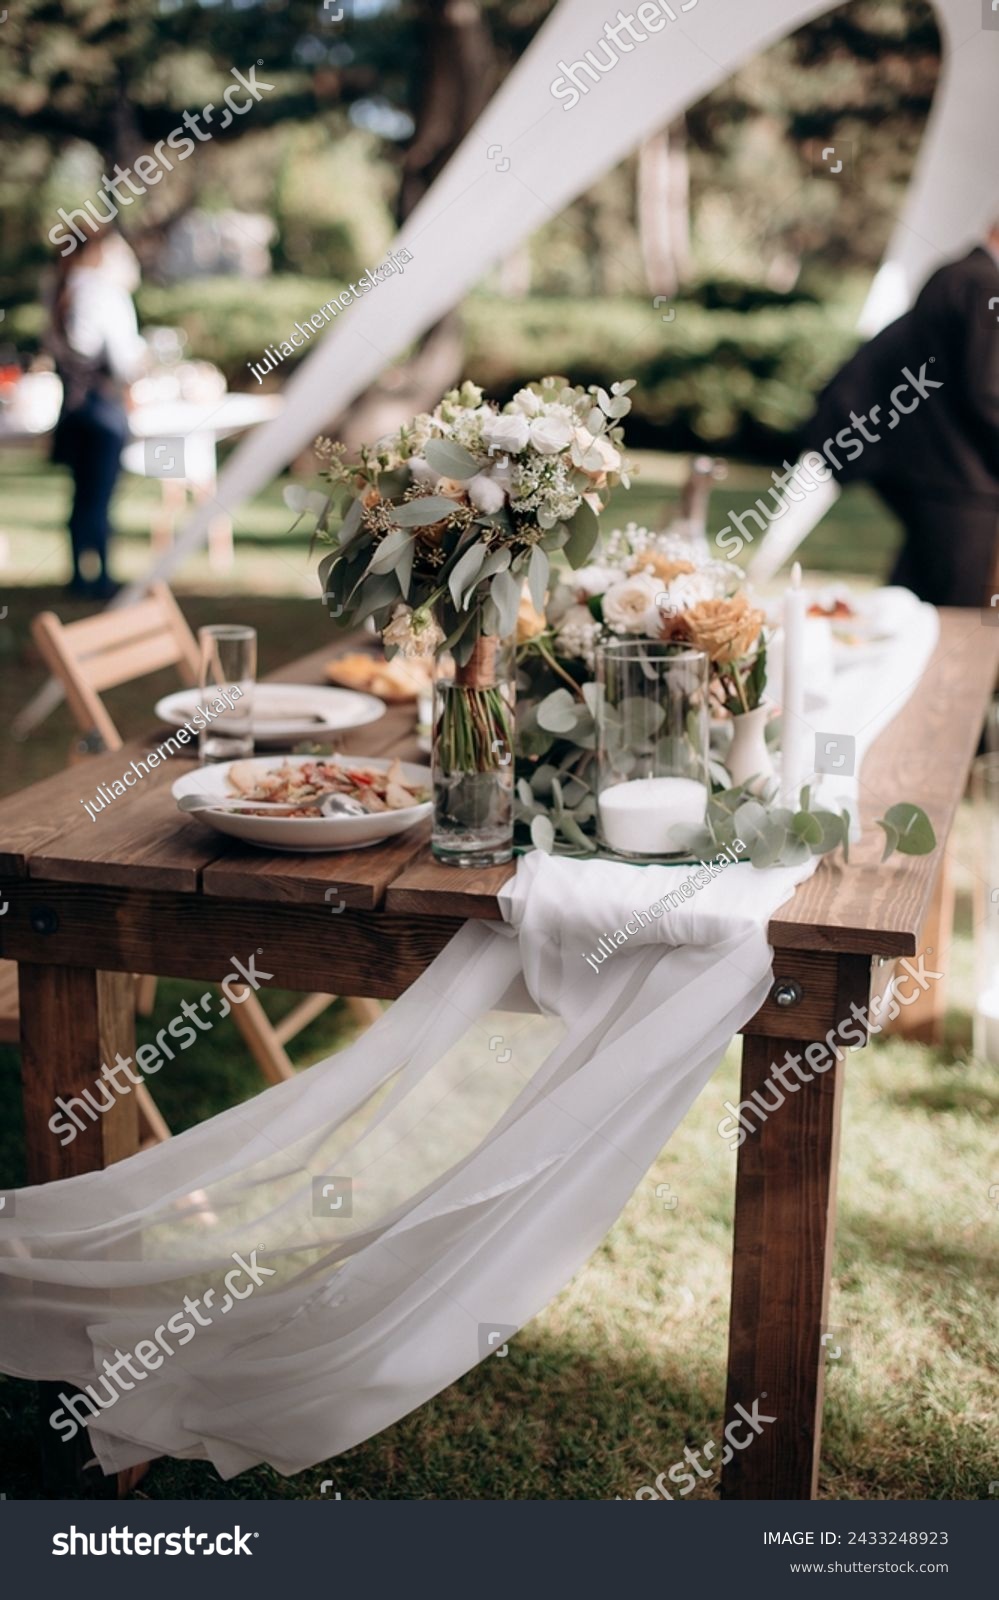 Many small pink and white flower arrangements with roses, eustoma and various flowers in clear glass vases. On the festive table in the wedding banquet area, compositions of flowers and greenery, cand #2433248923